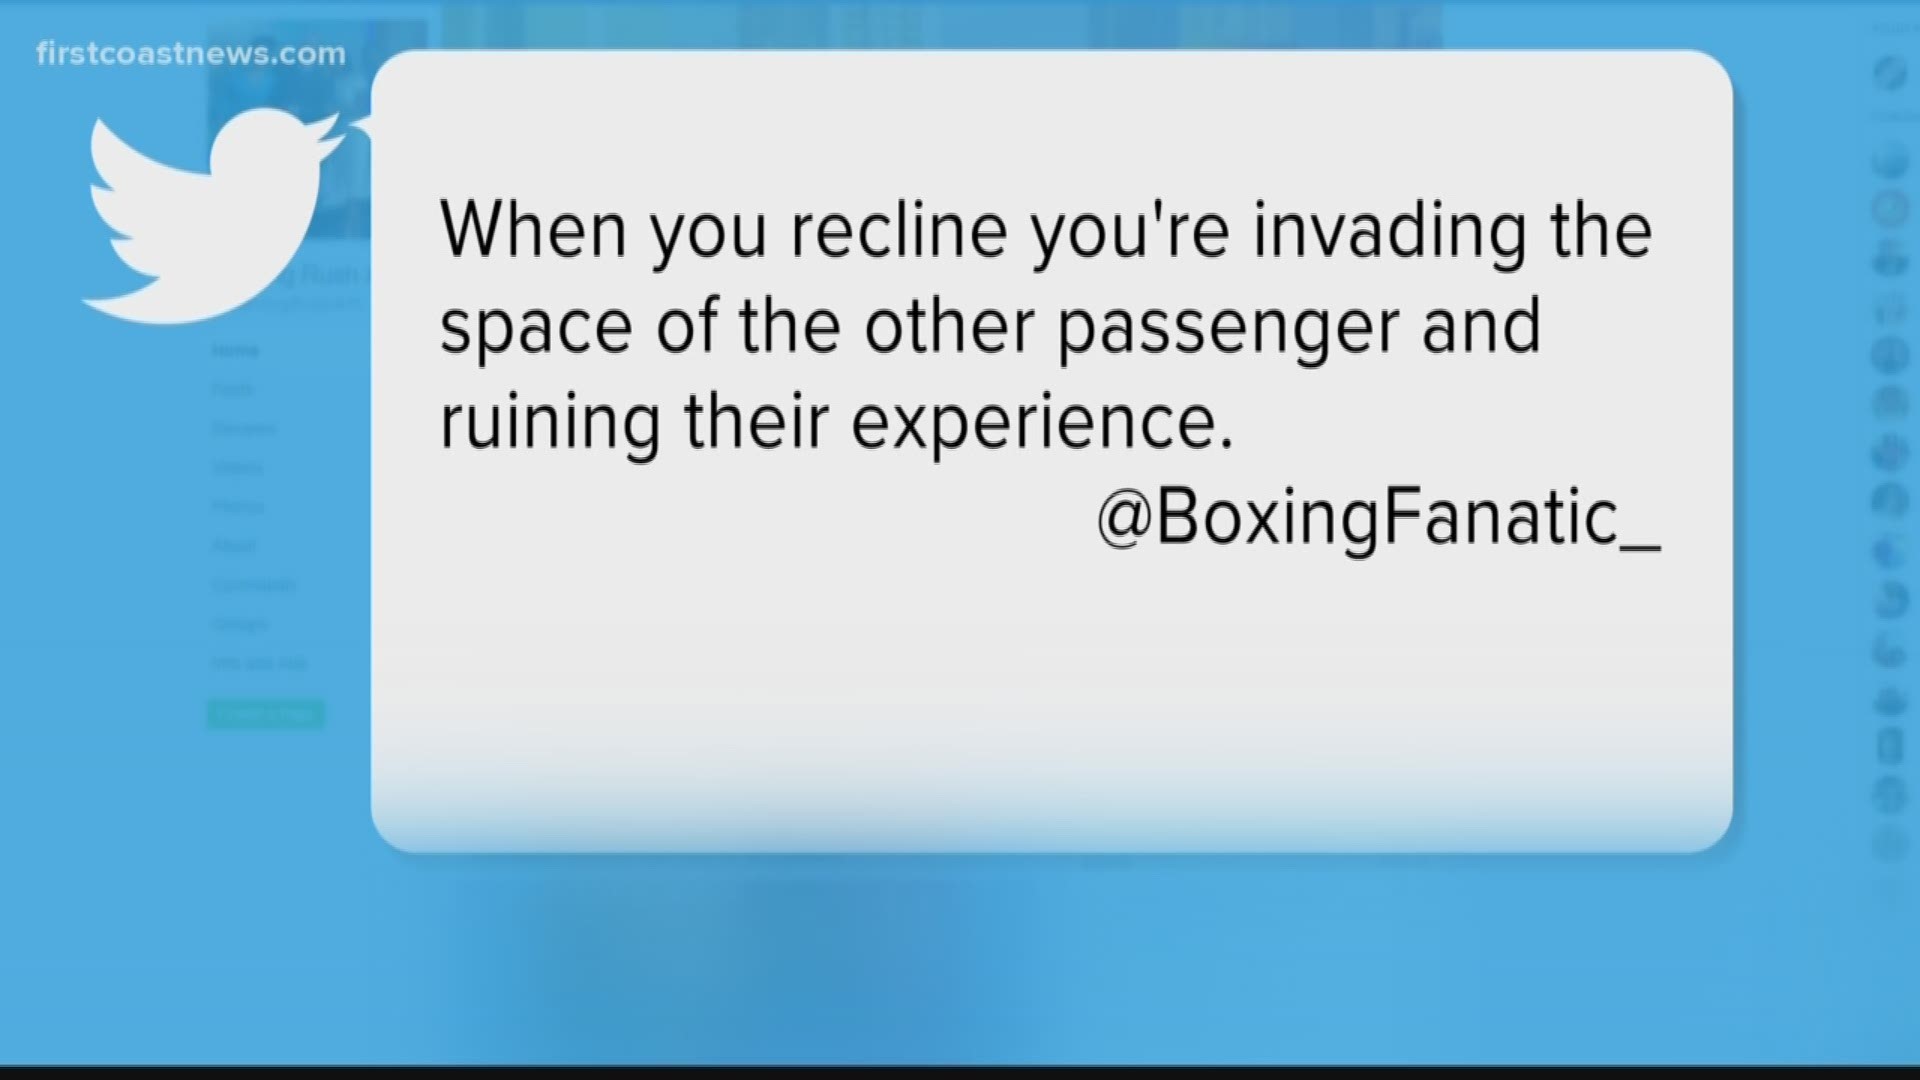 One woman is upset with her experience on a flight after a man continuously punched the bag of her seat. Now viewers are weighing in.